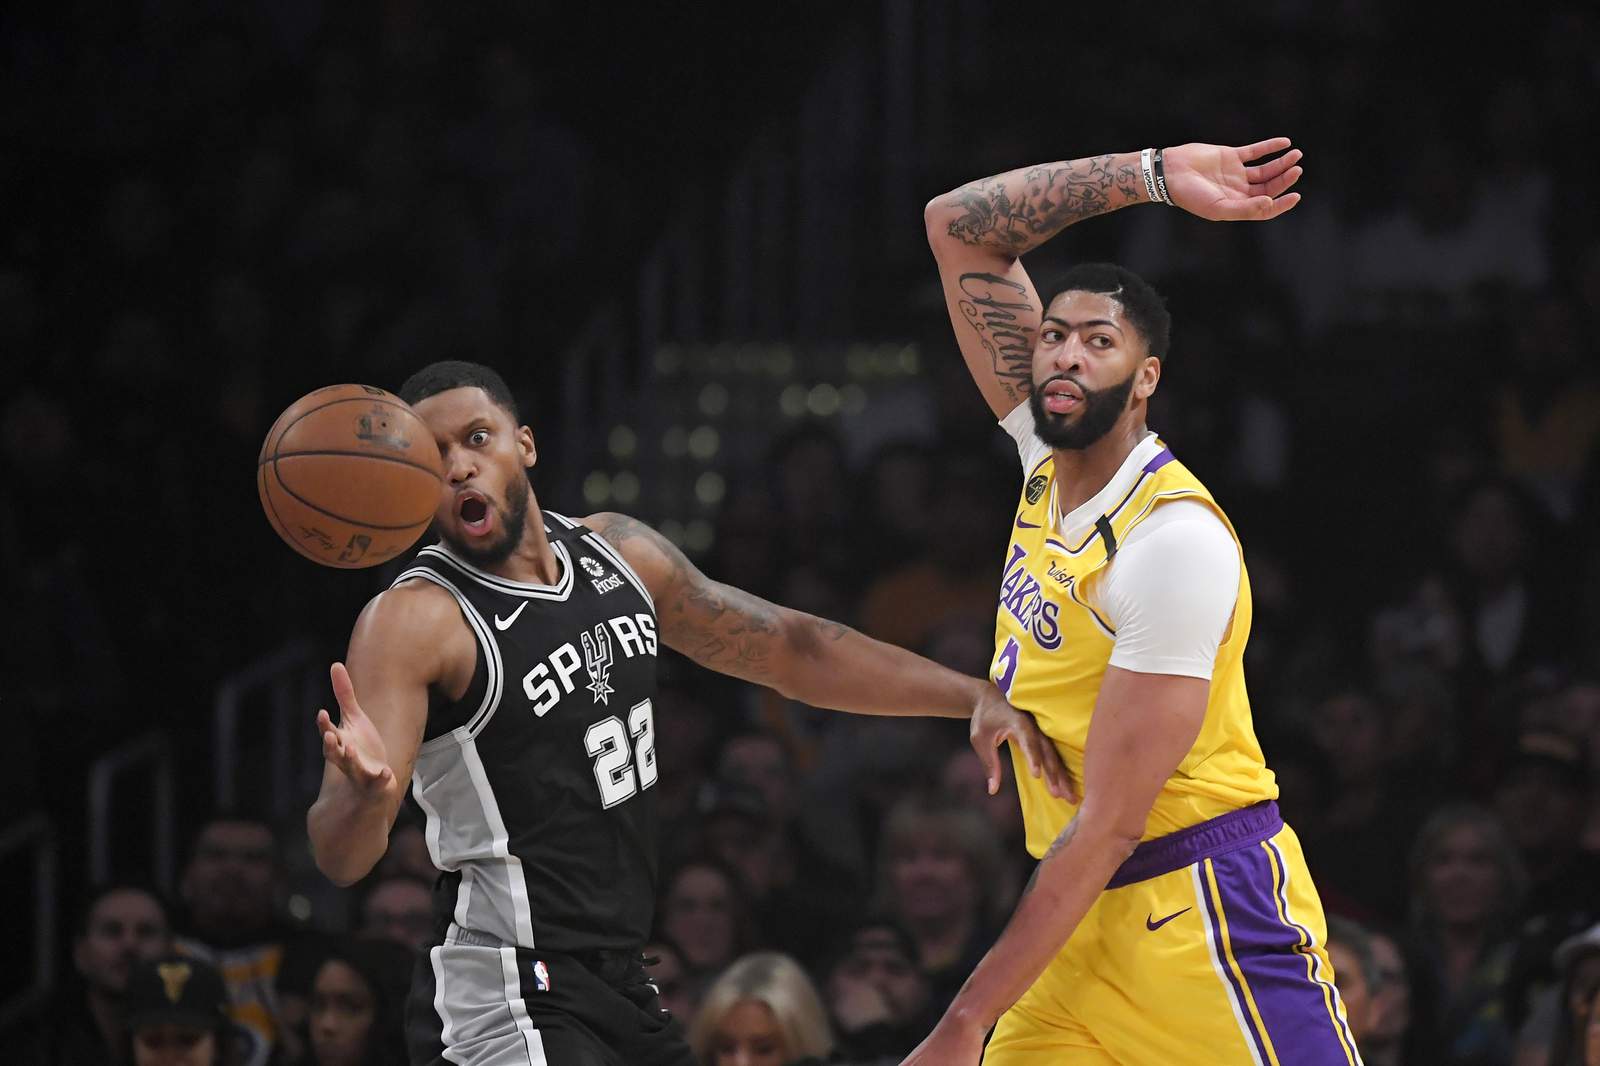 LeBron gets 36 in 3-point barrage, Lakers rout Spurs 129-102